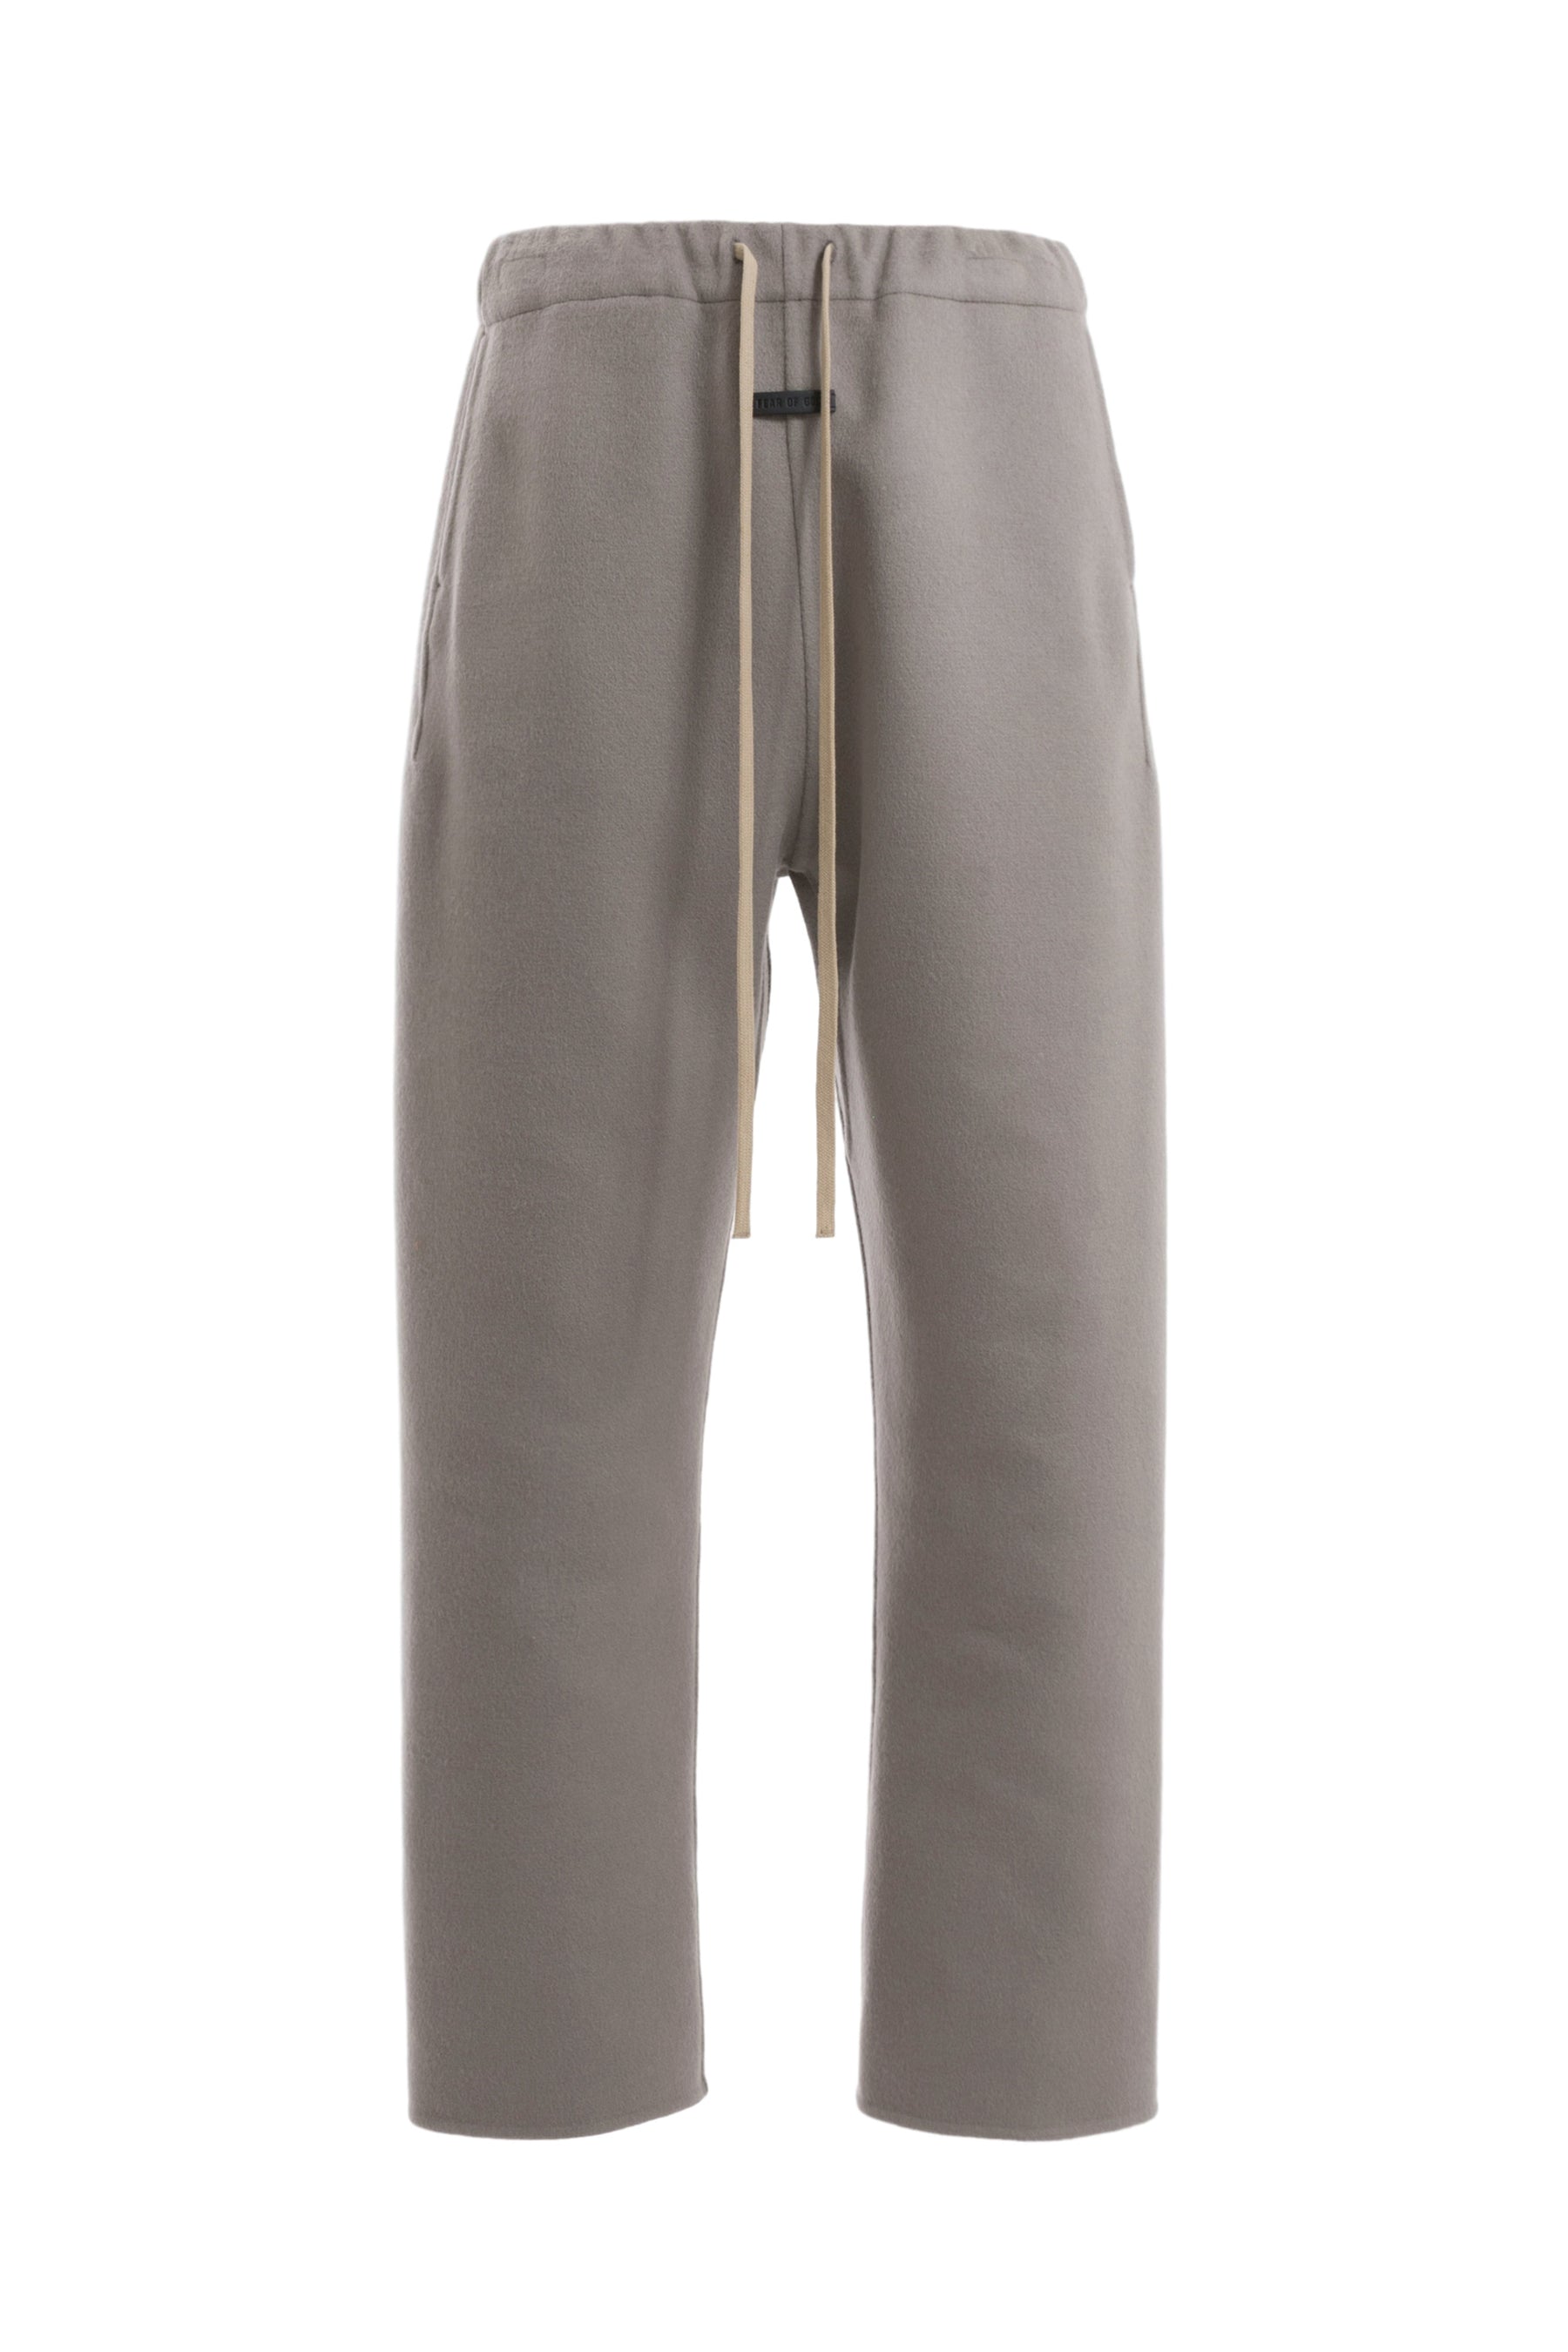 FEAR OF GOD THE ETERNAL COLLECTION ETERNAL WOOL CASHMERE PANT